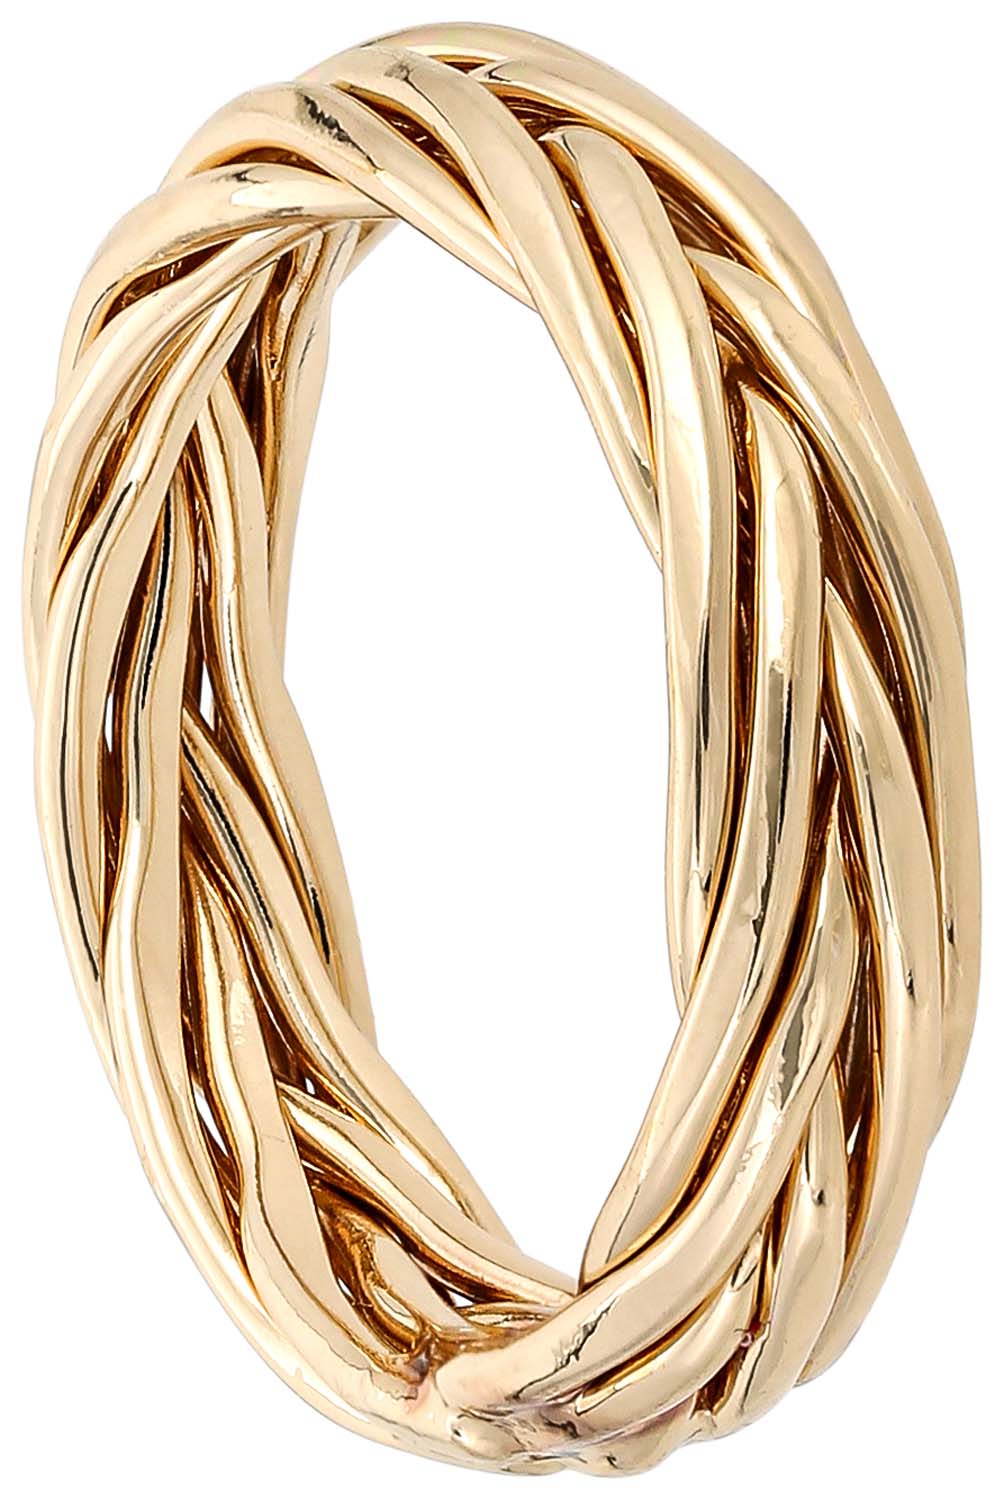 Ring - Braided Gold